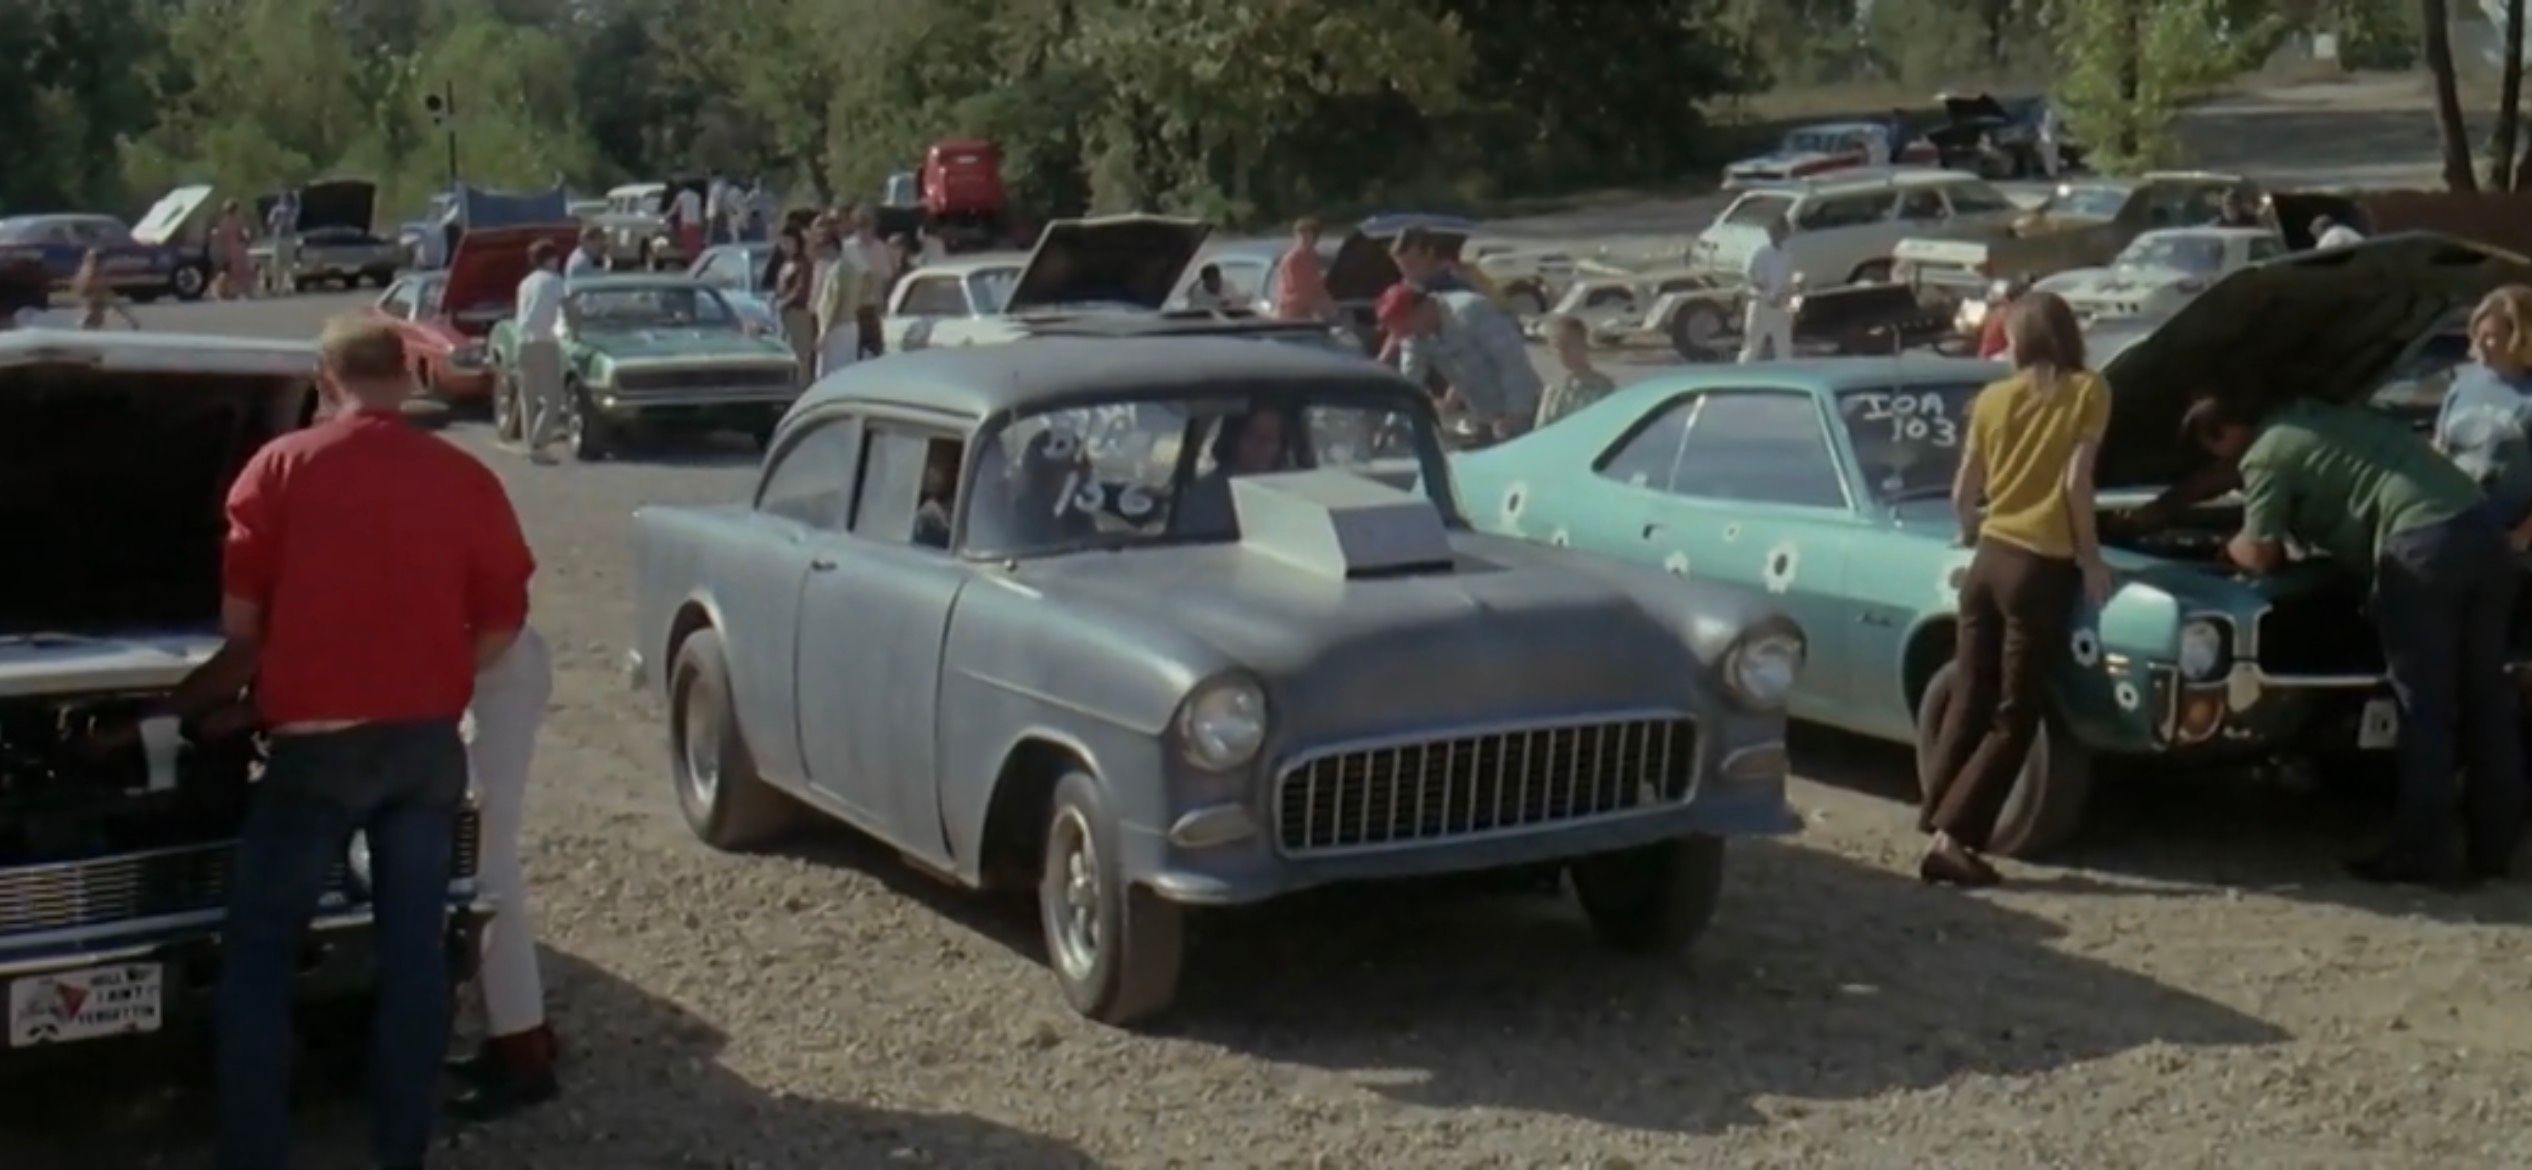 1955 Chevrolet 150 featured in Two-Lane Blacktop